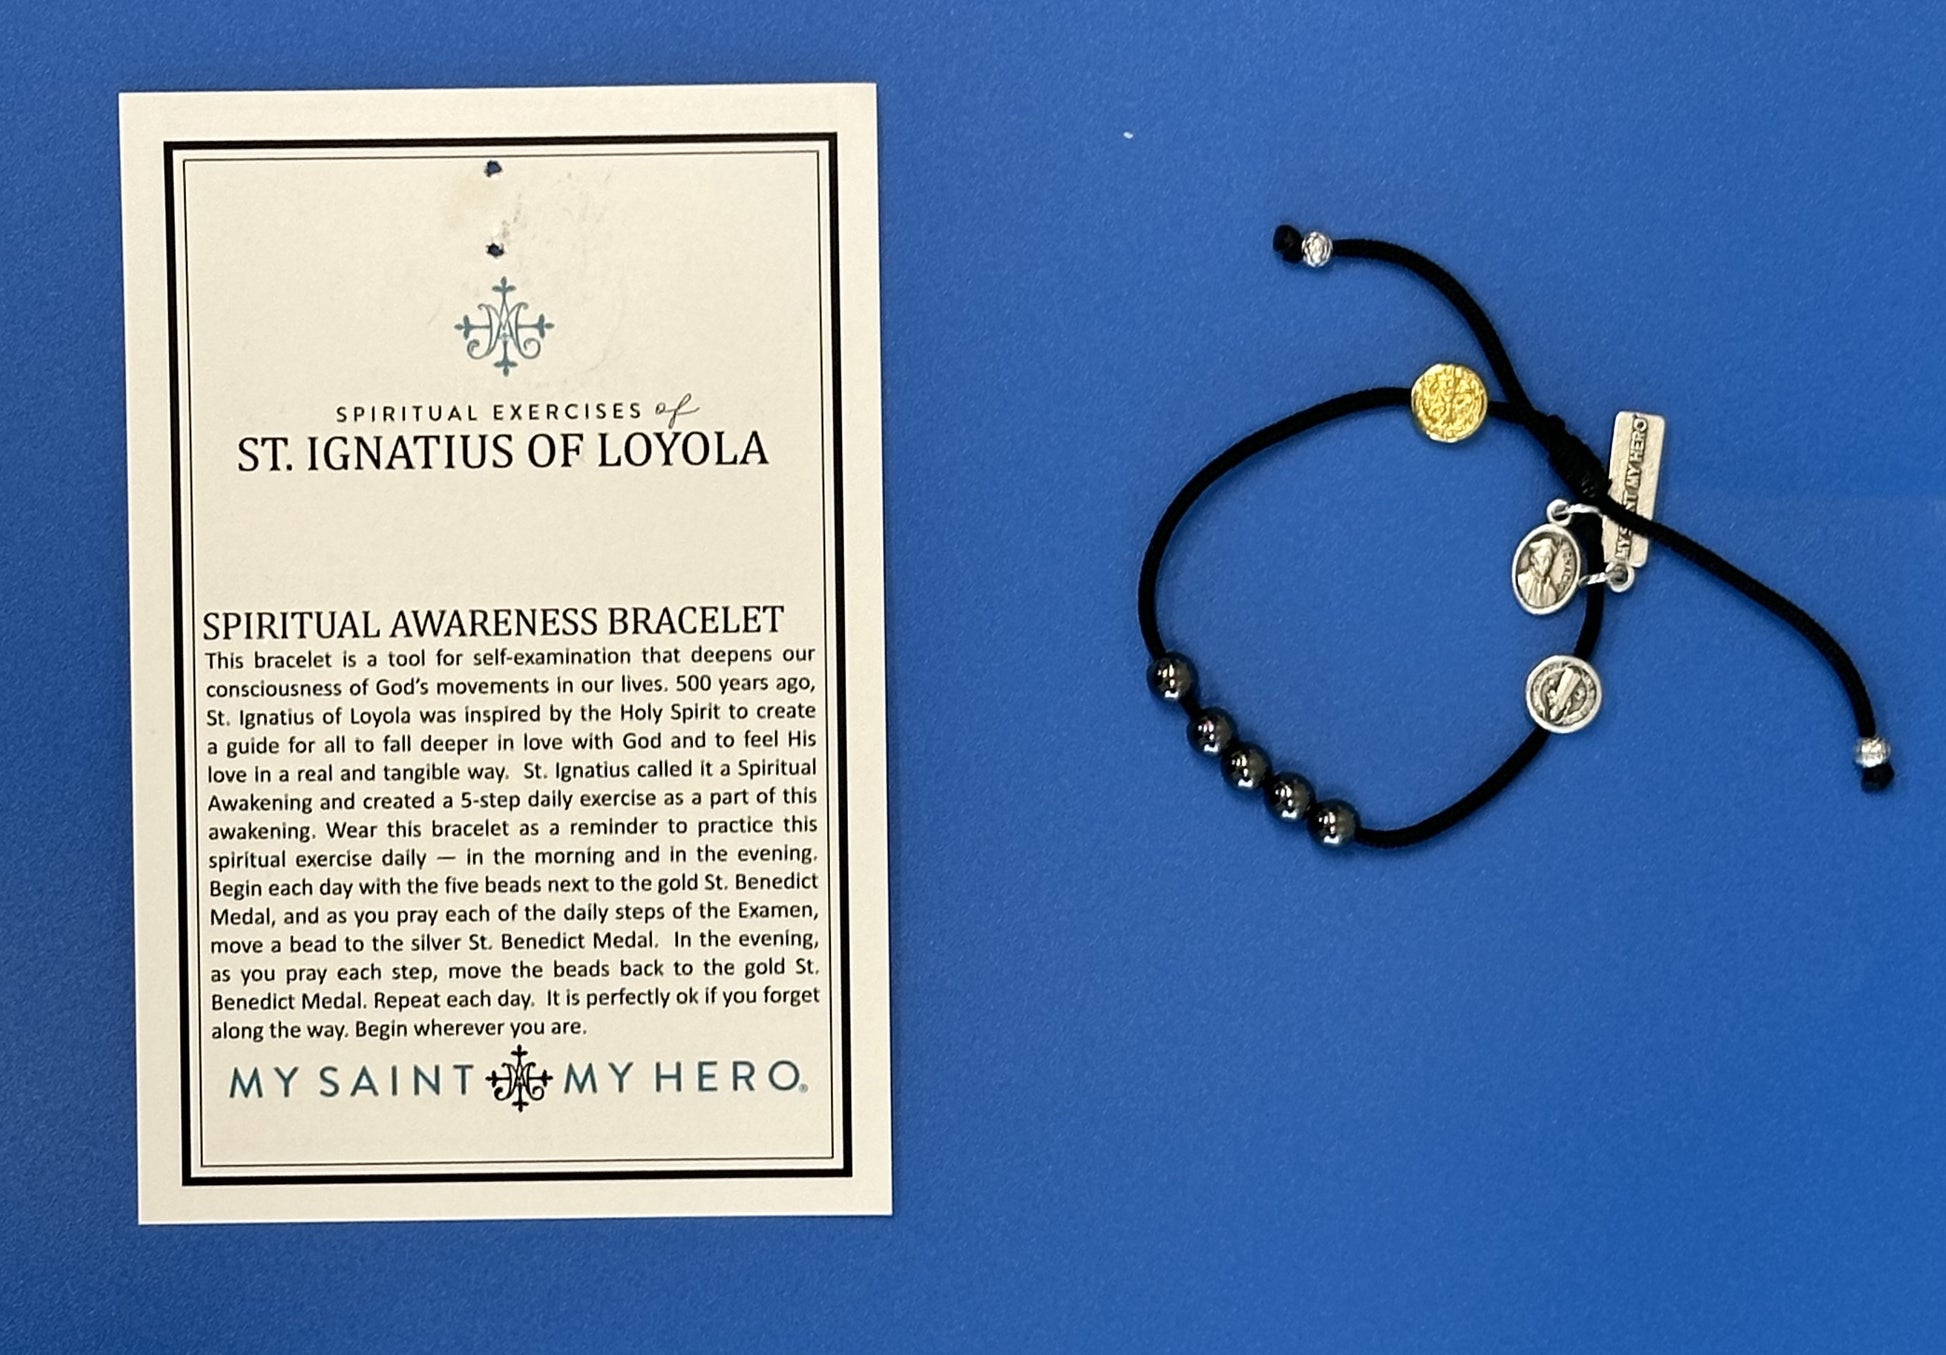 My Saint My Hero.  This bracelet is a tool for self-examination that deepens our consciousness of God's movements in our lives. St. Ignatius called it a Spiritual Awakening and created a 5-step daily exercise as a part of this awakening. Wear this bracelet as a reminder to practice this spiritual exercise daily - in the morning and in the evening.